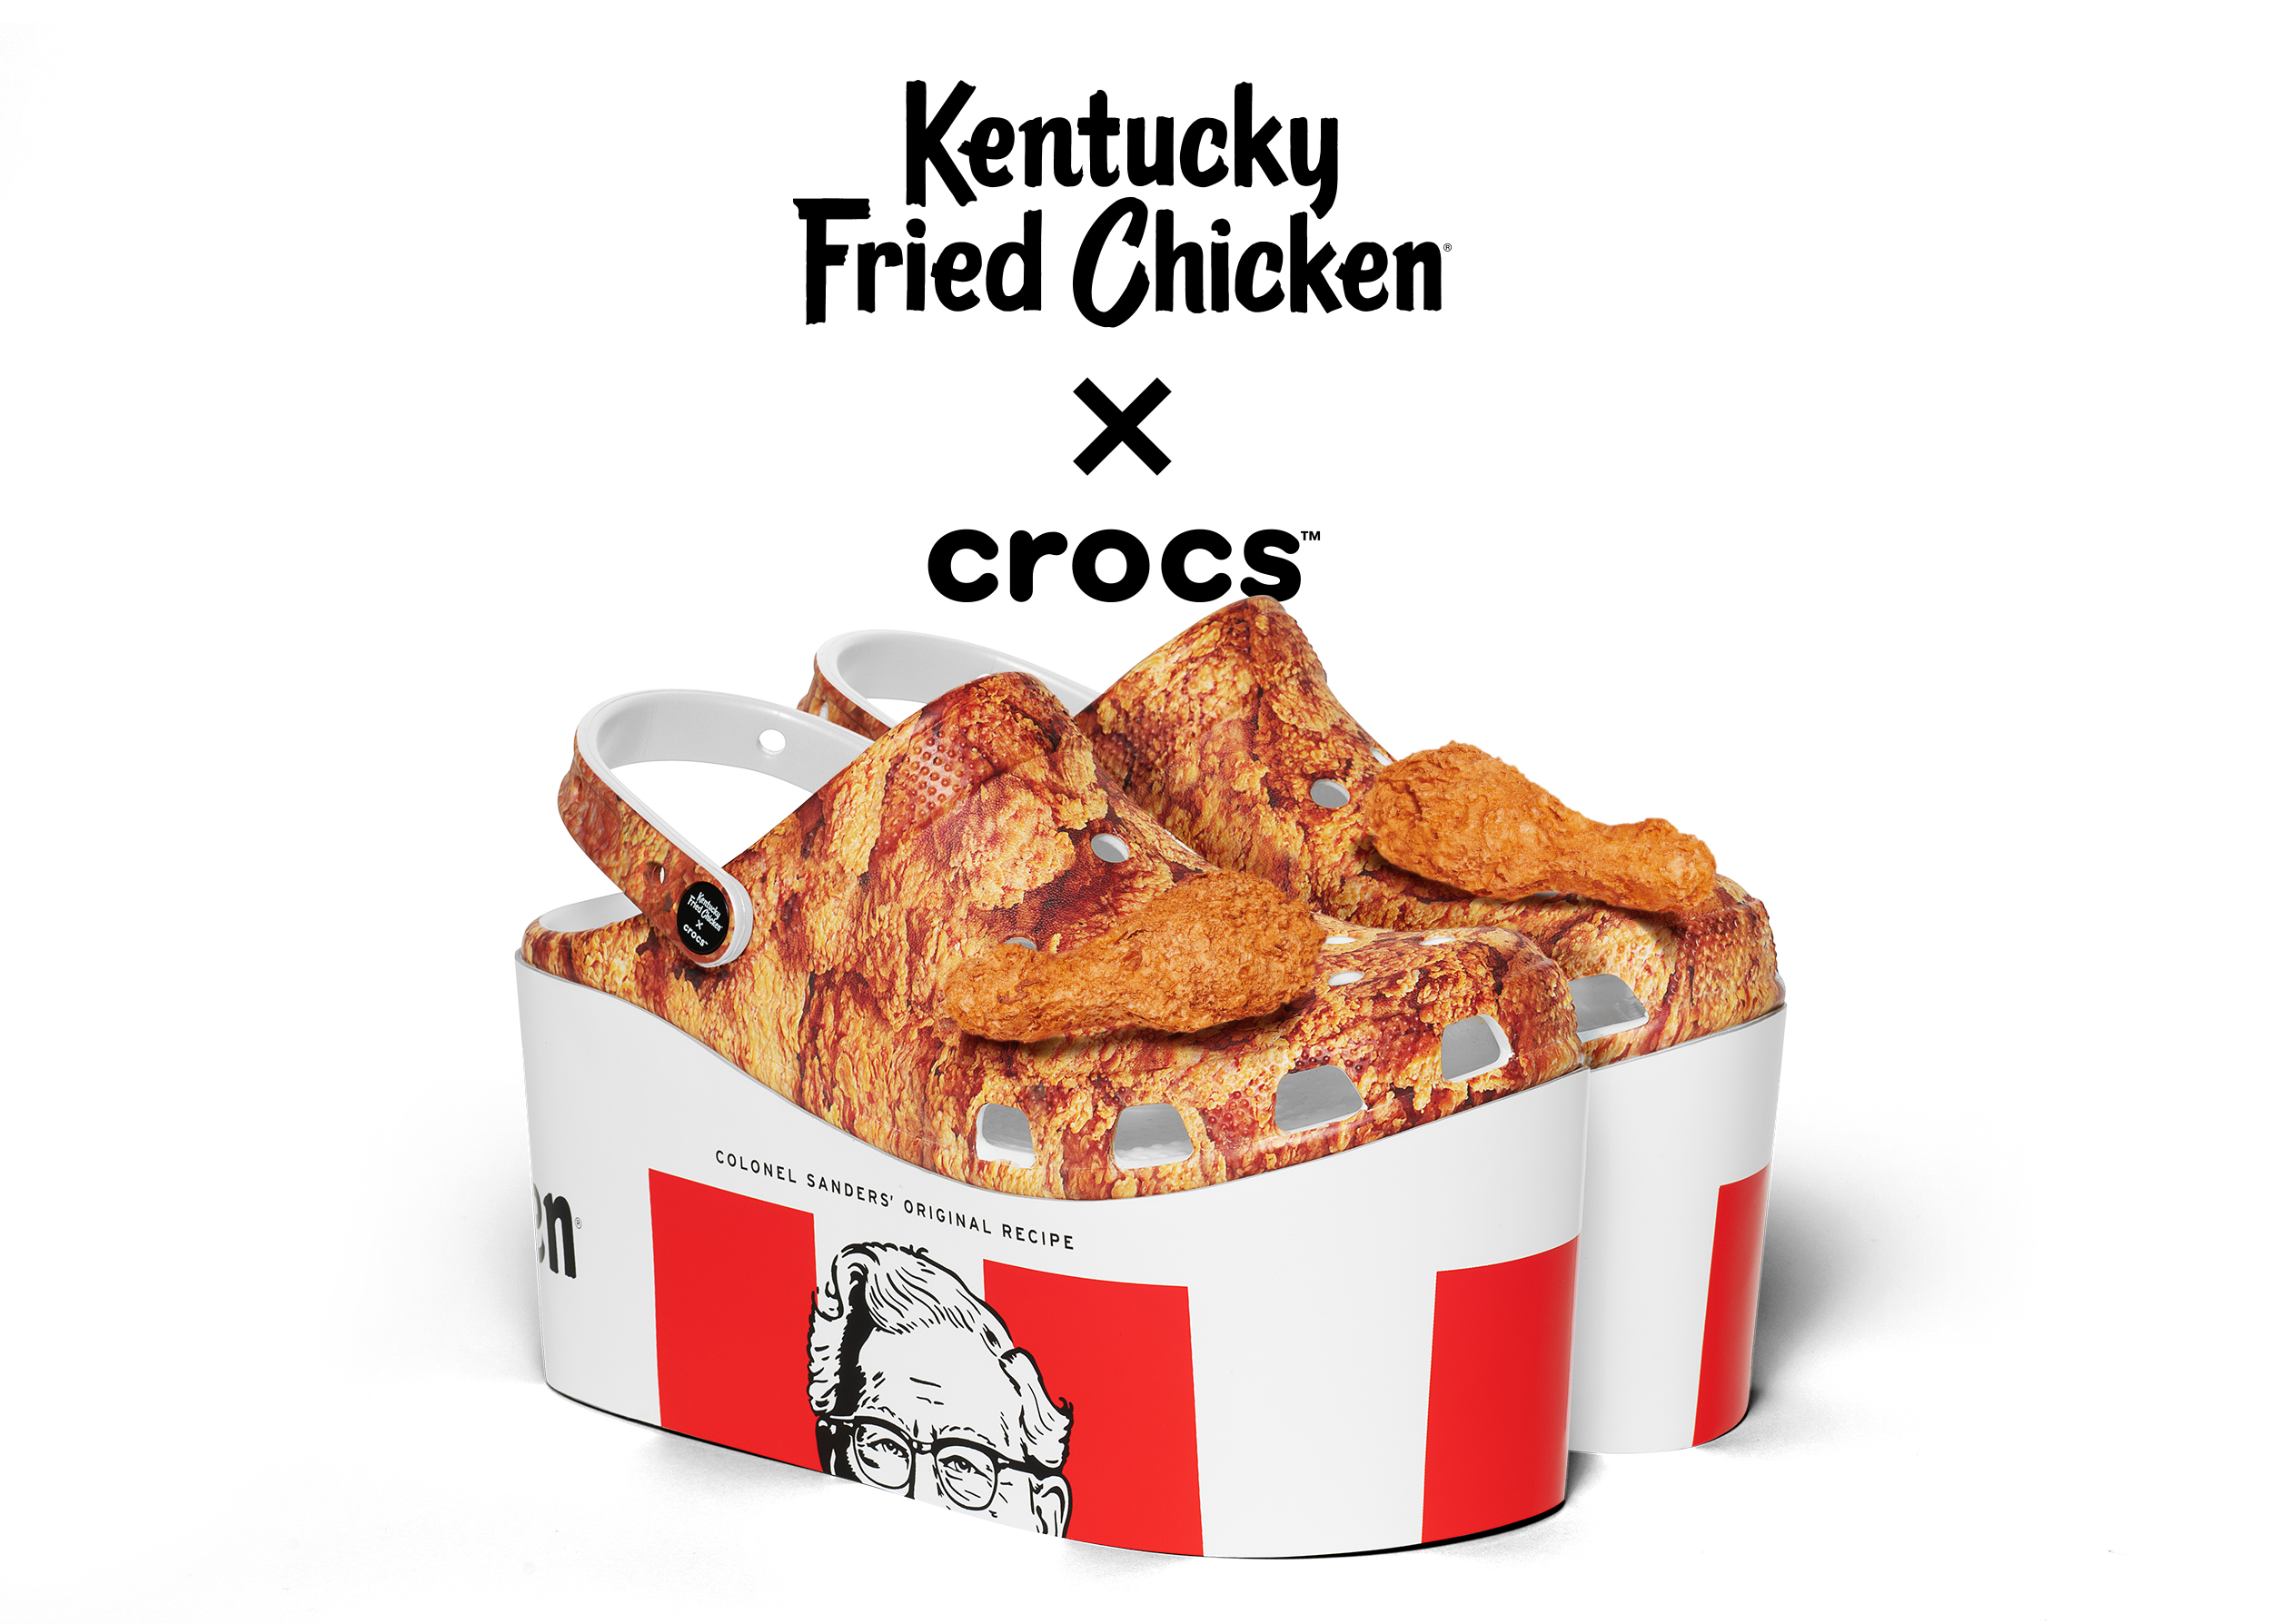 by the way kentucky fried chicken near me